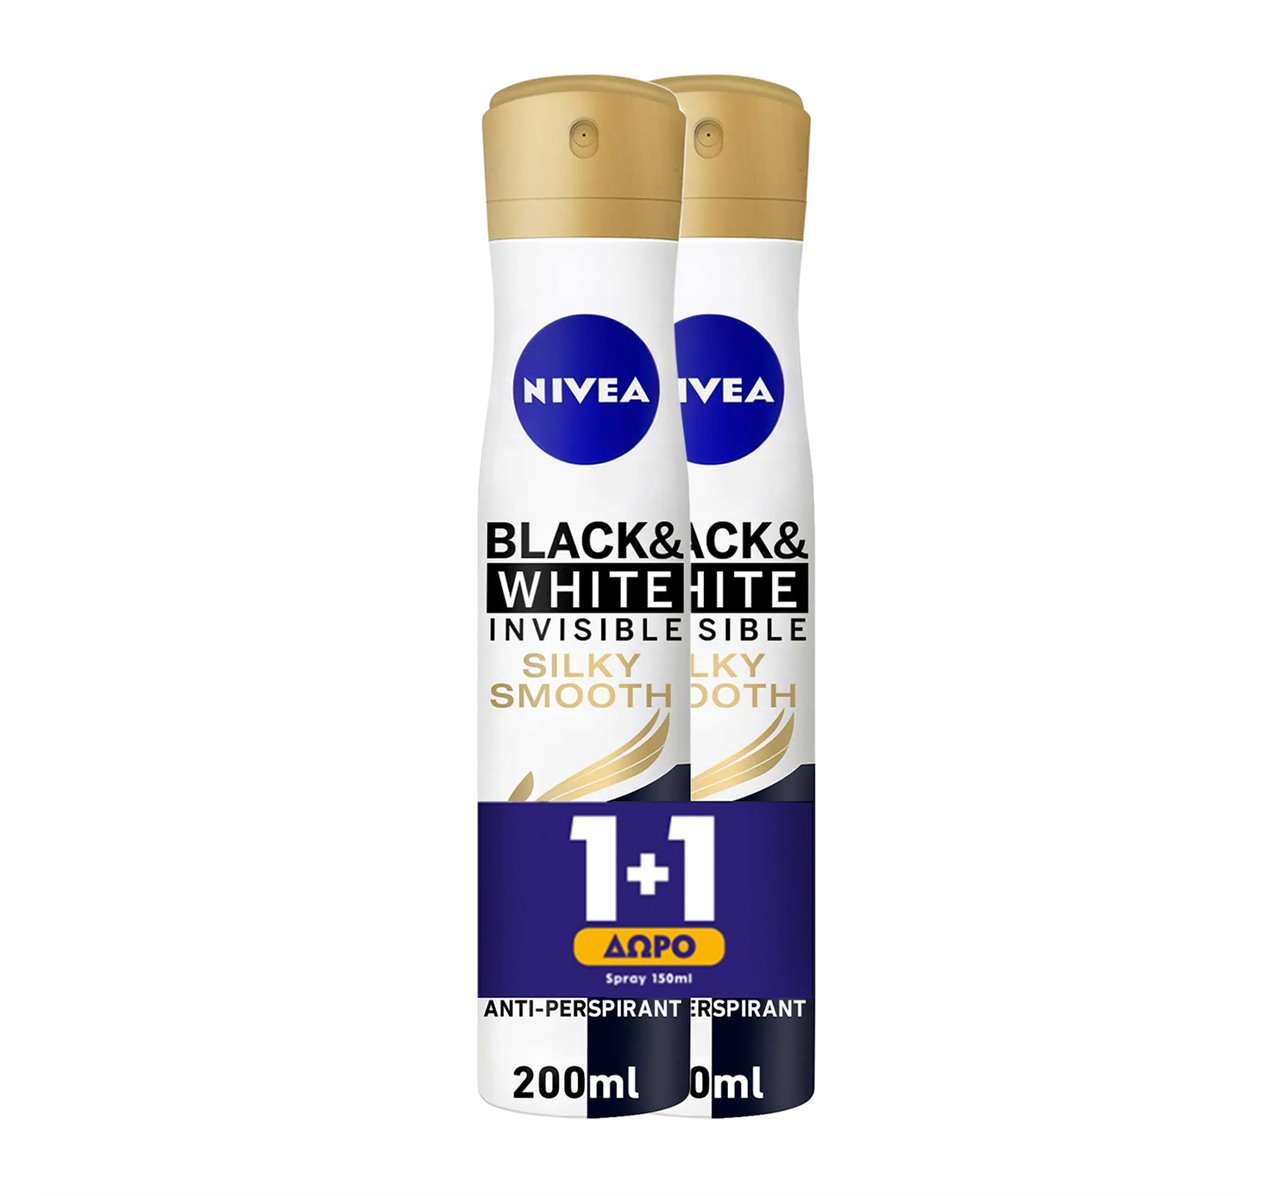 NIVEA Antiperspirant Spray for Women, Black & White Invisible Silky Smooth  Shaving, 150ml: Buy Online at Best Price in Egypt - Souq is now